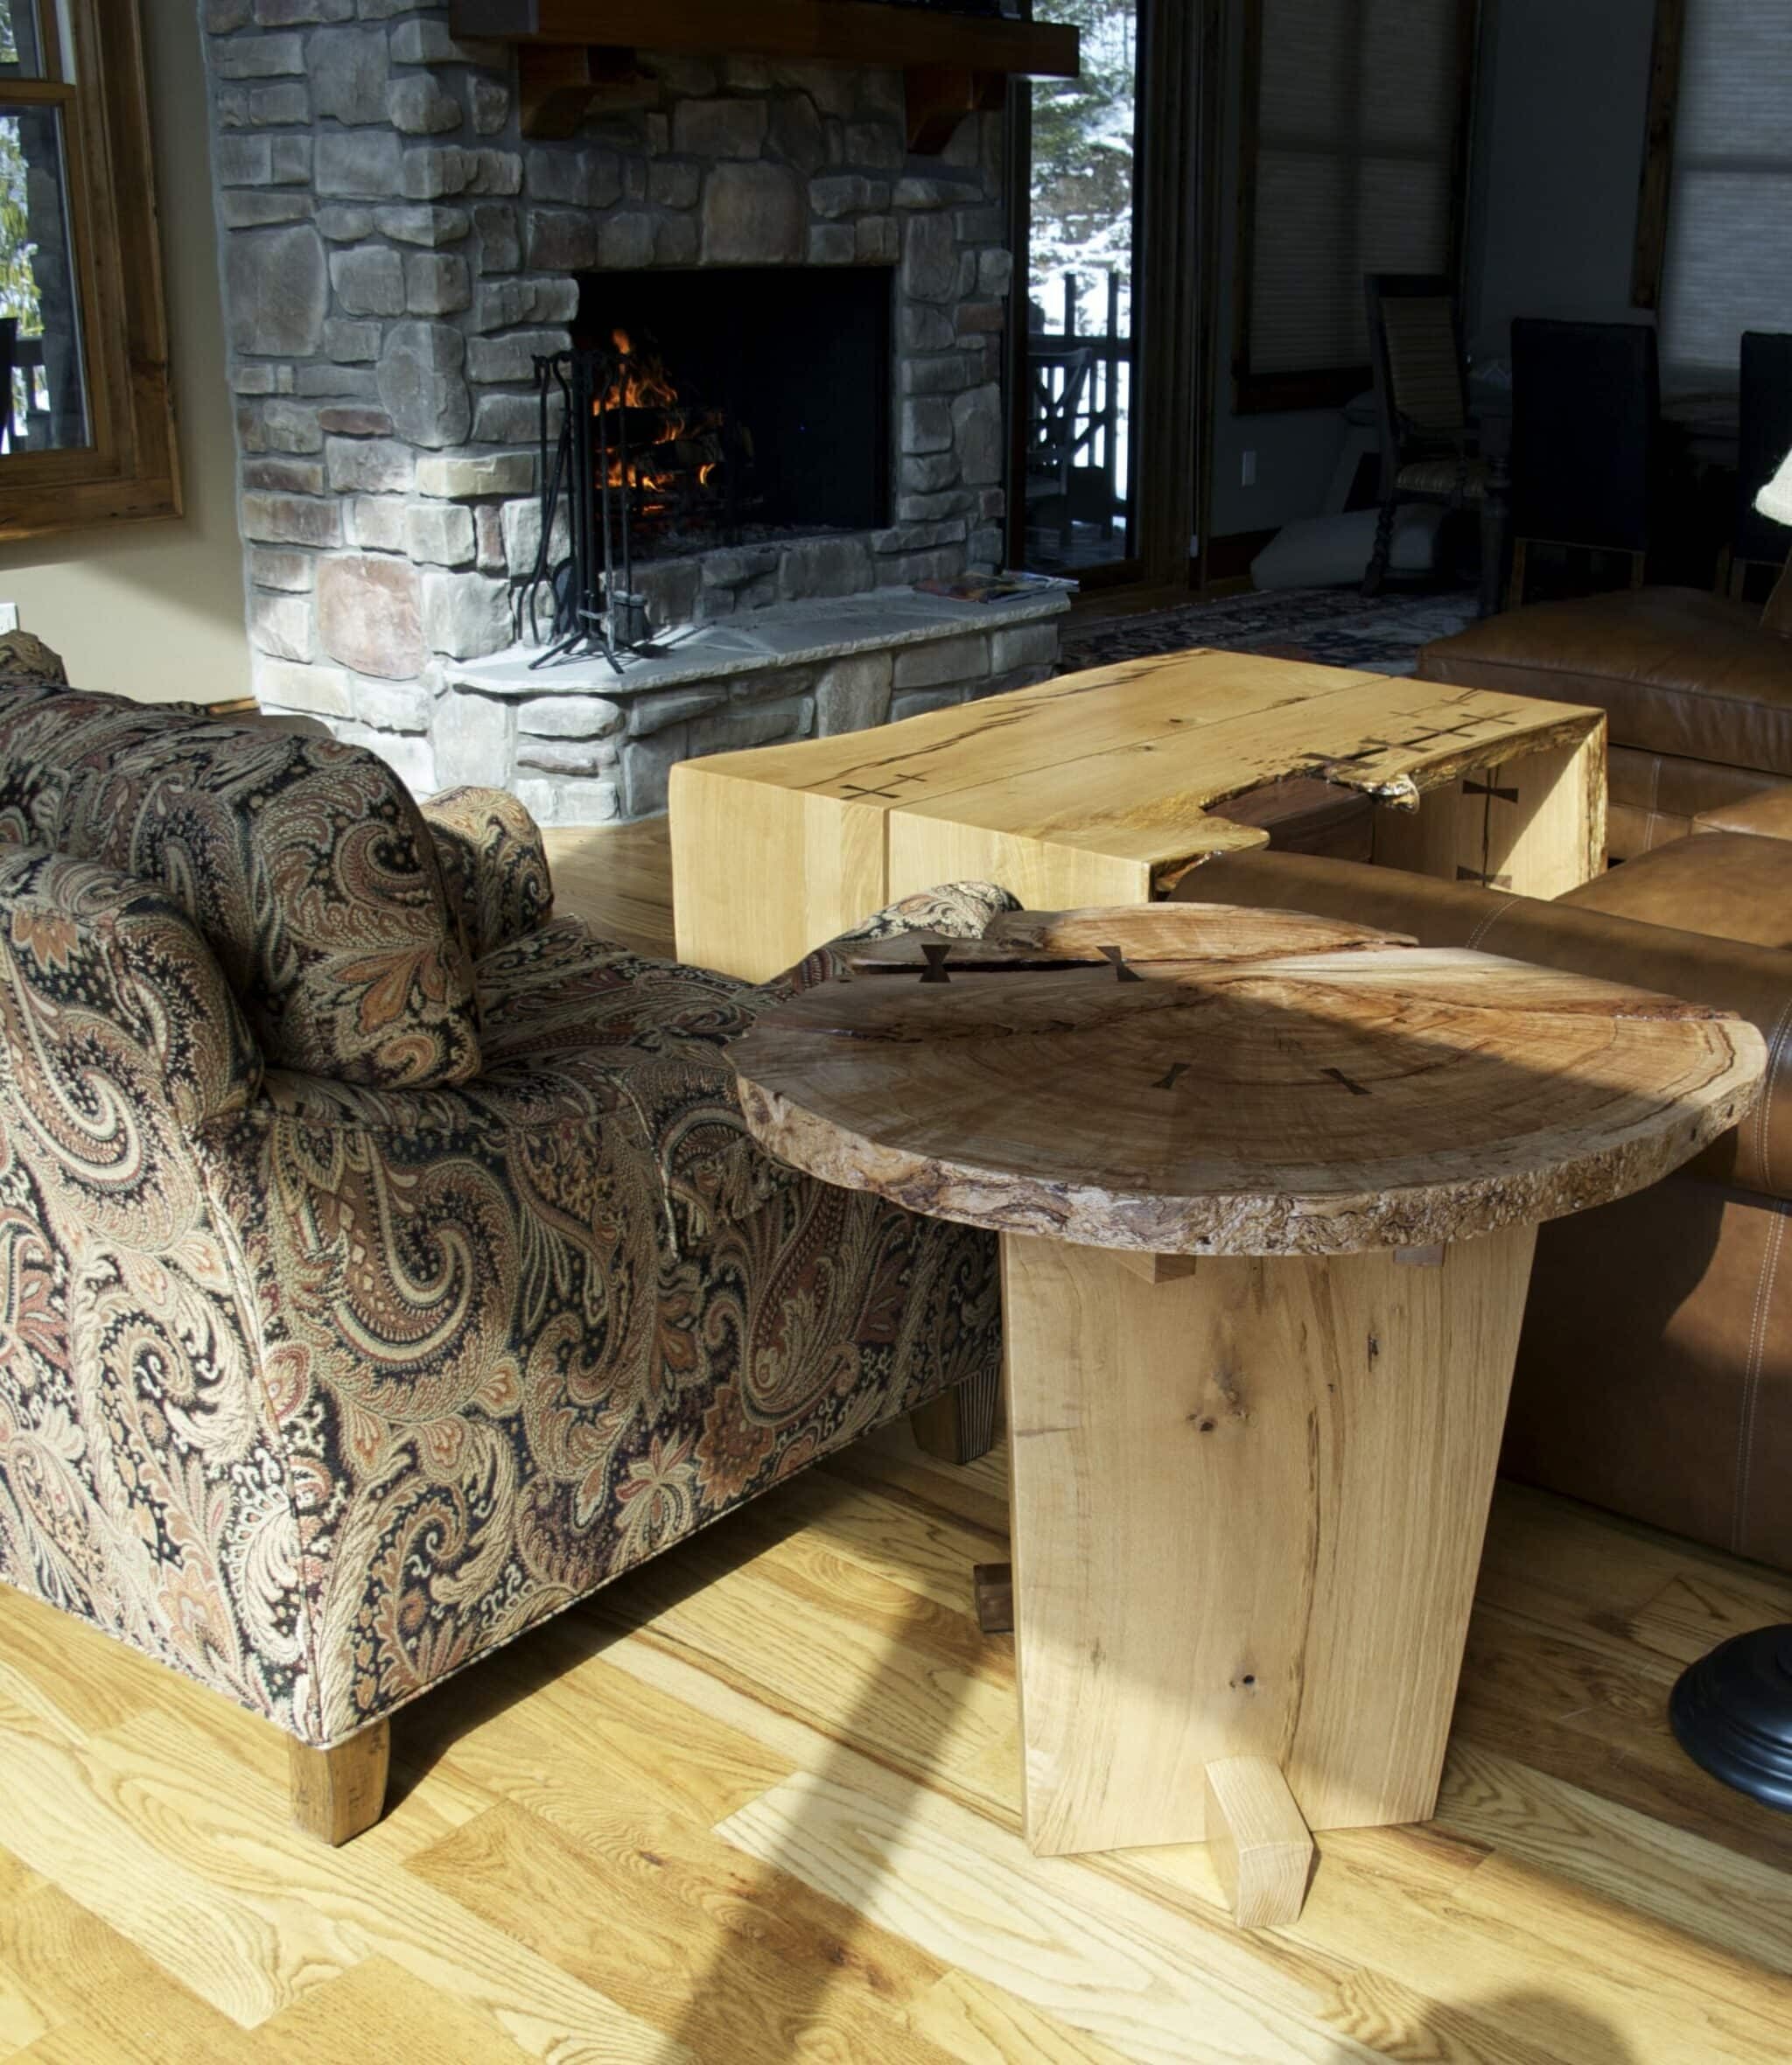 Wood Slab Projects &amp; Ideas Live Edge Table Designs ...